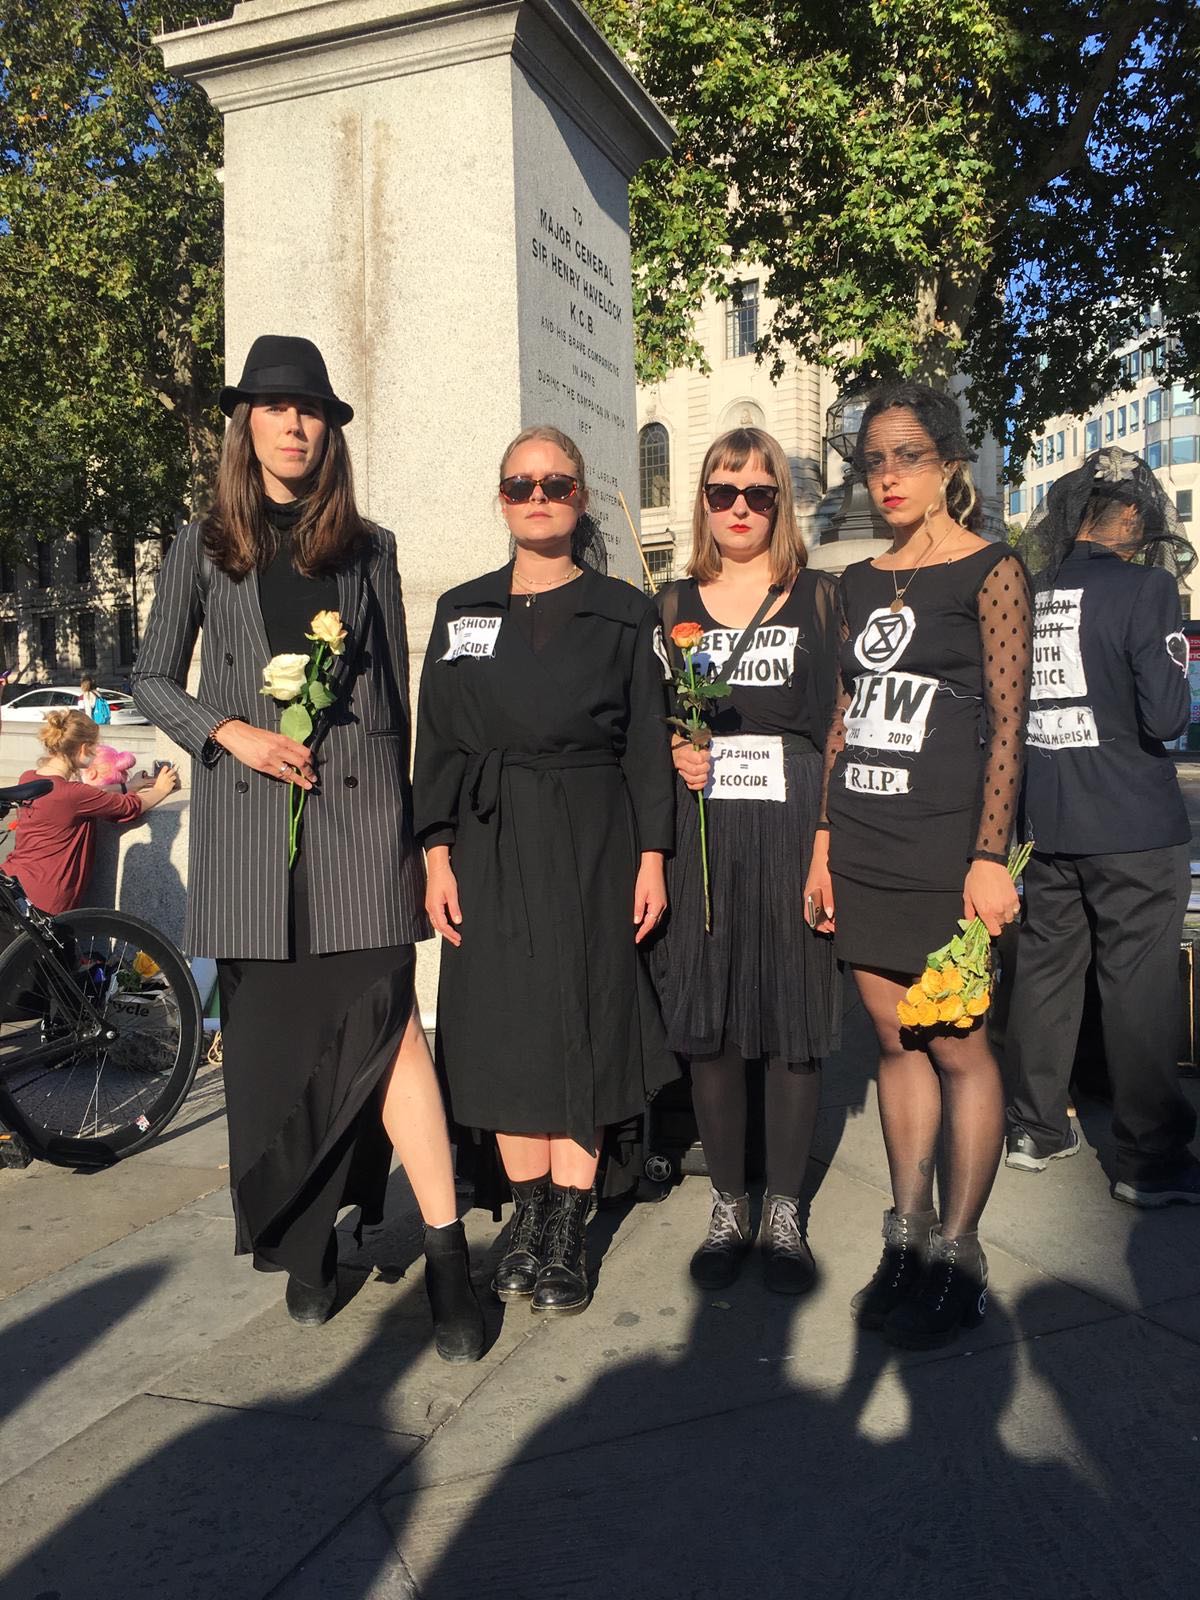 Some protesters wore all-black funeral outfits for the event